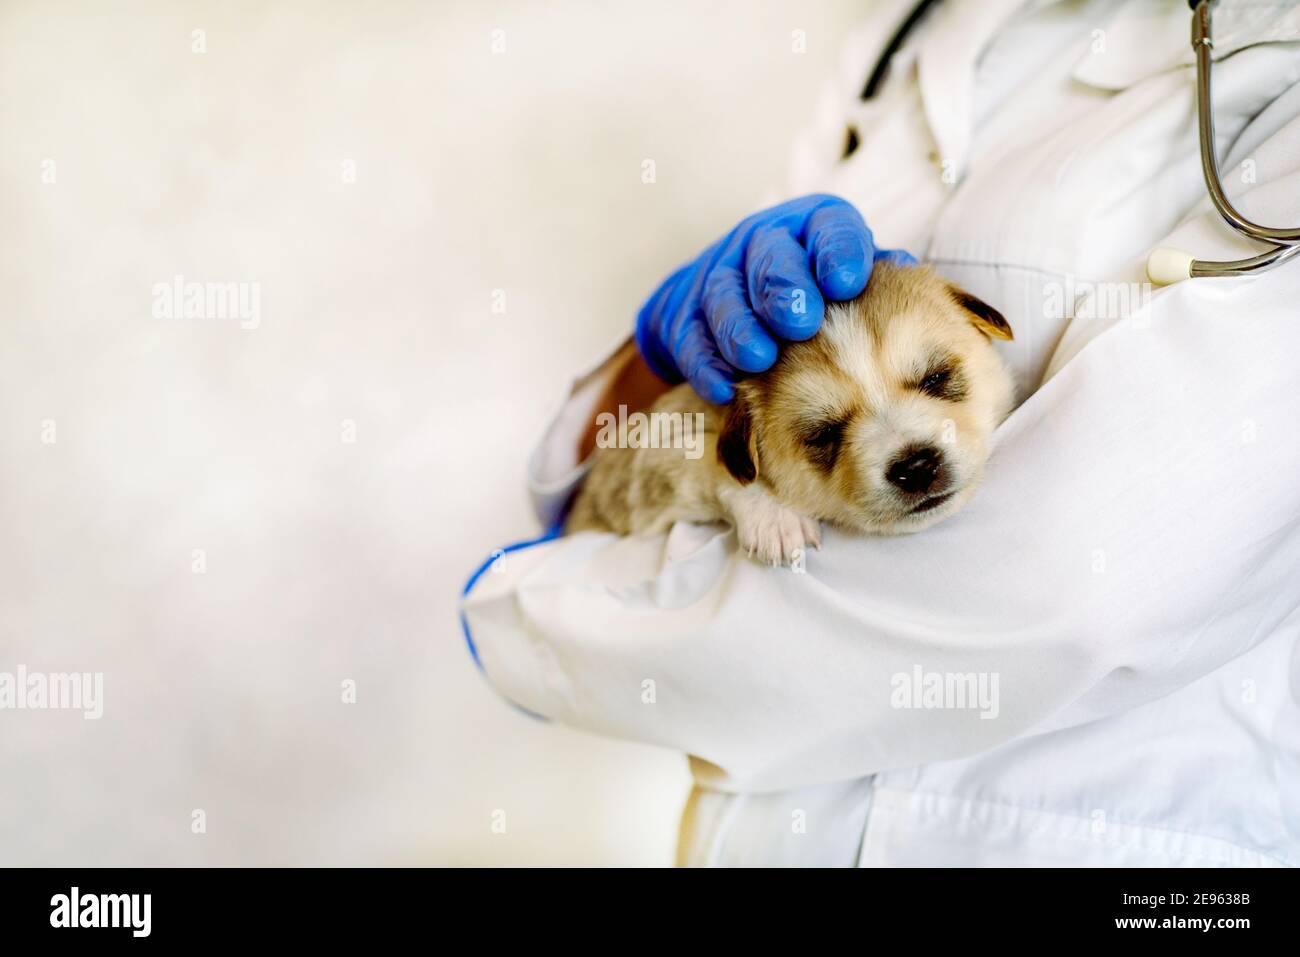 Puppy sleeps on the hand.care for a purebred dog. Day of the mutts July 31. In the hands of a vet doctor in the clinic. pet before vaccination. Stock Photo